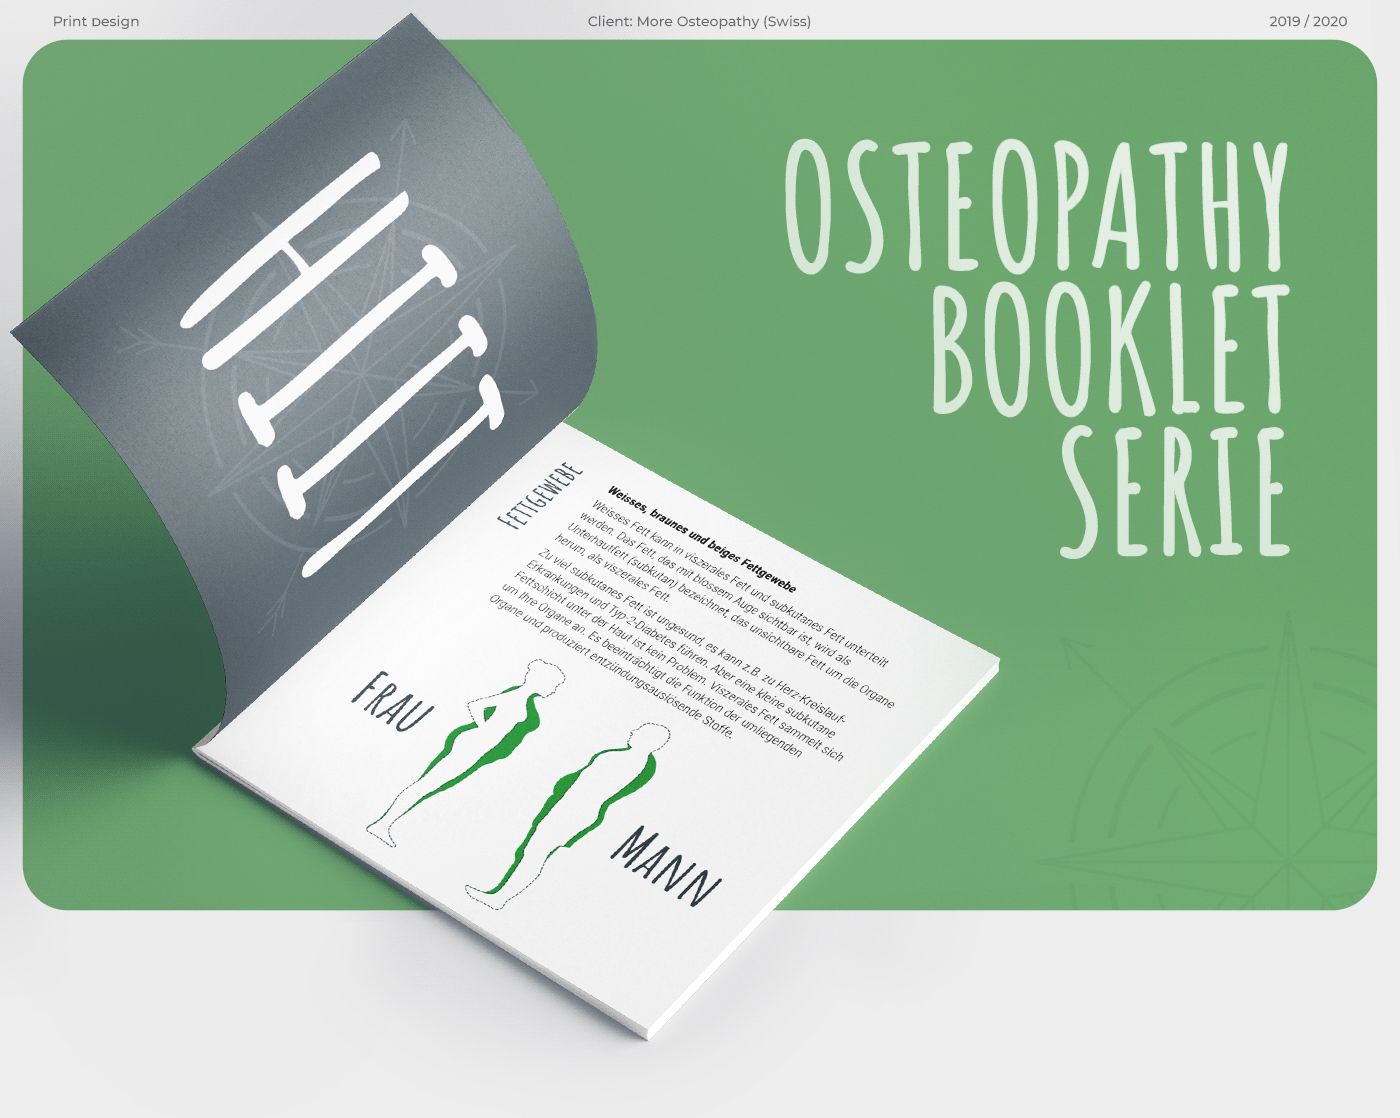 book Booklet cube editorial illustrations InDesign Osteo Osteopathy print typography  